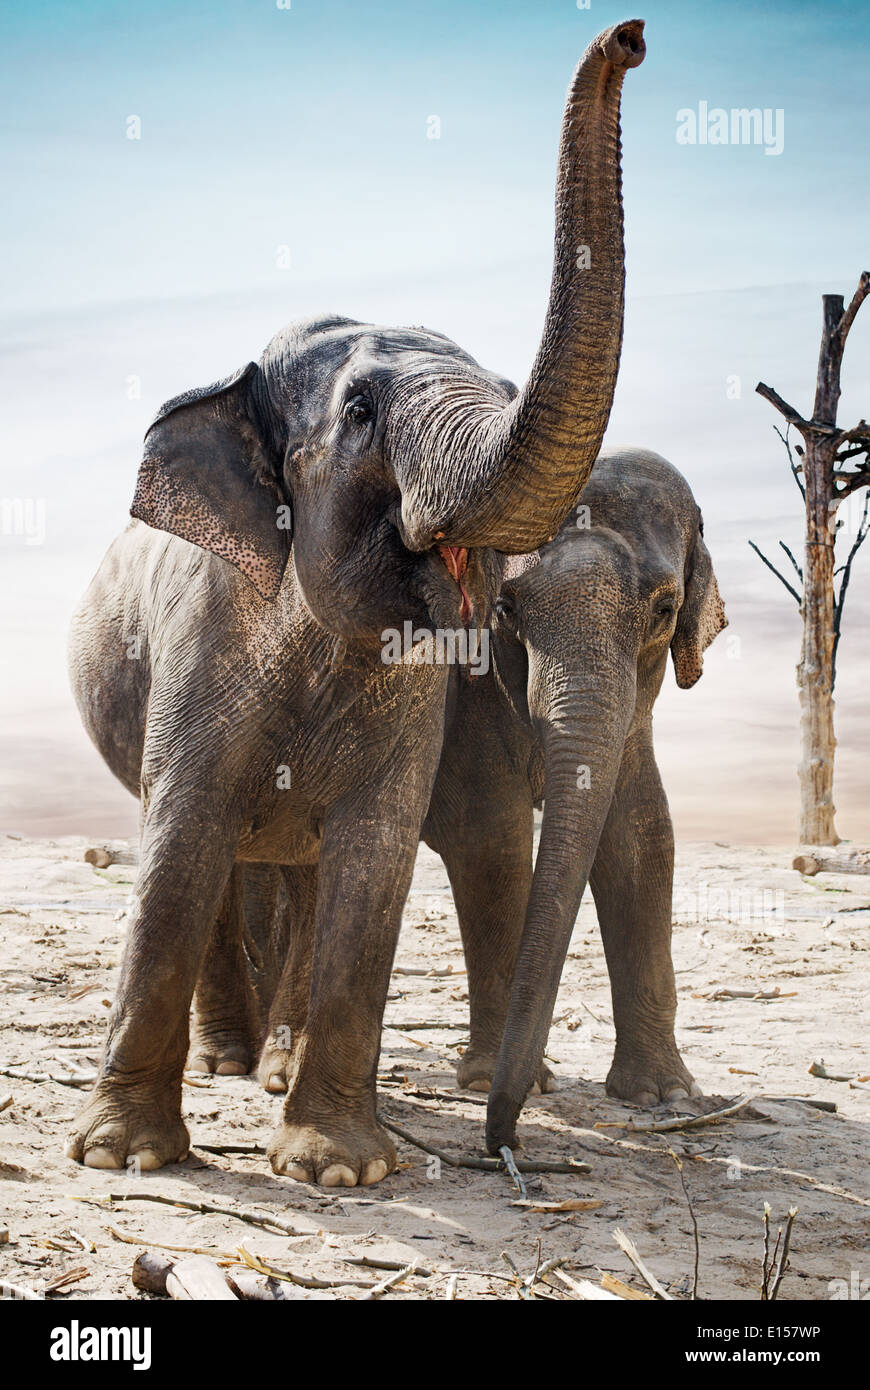 Indian elephants family stand outdoor Stock Photo